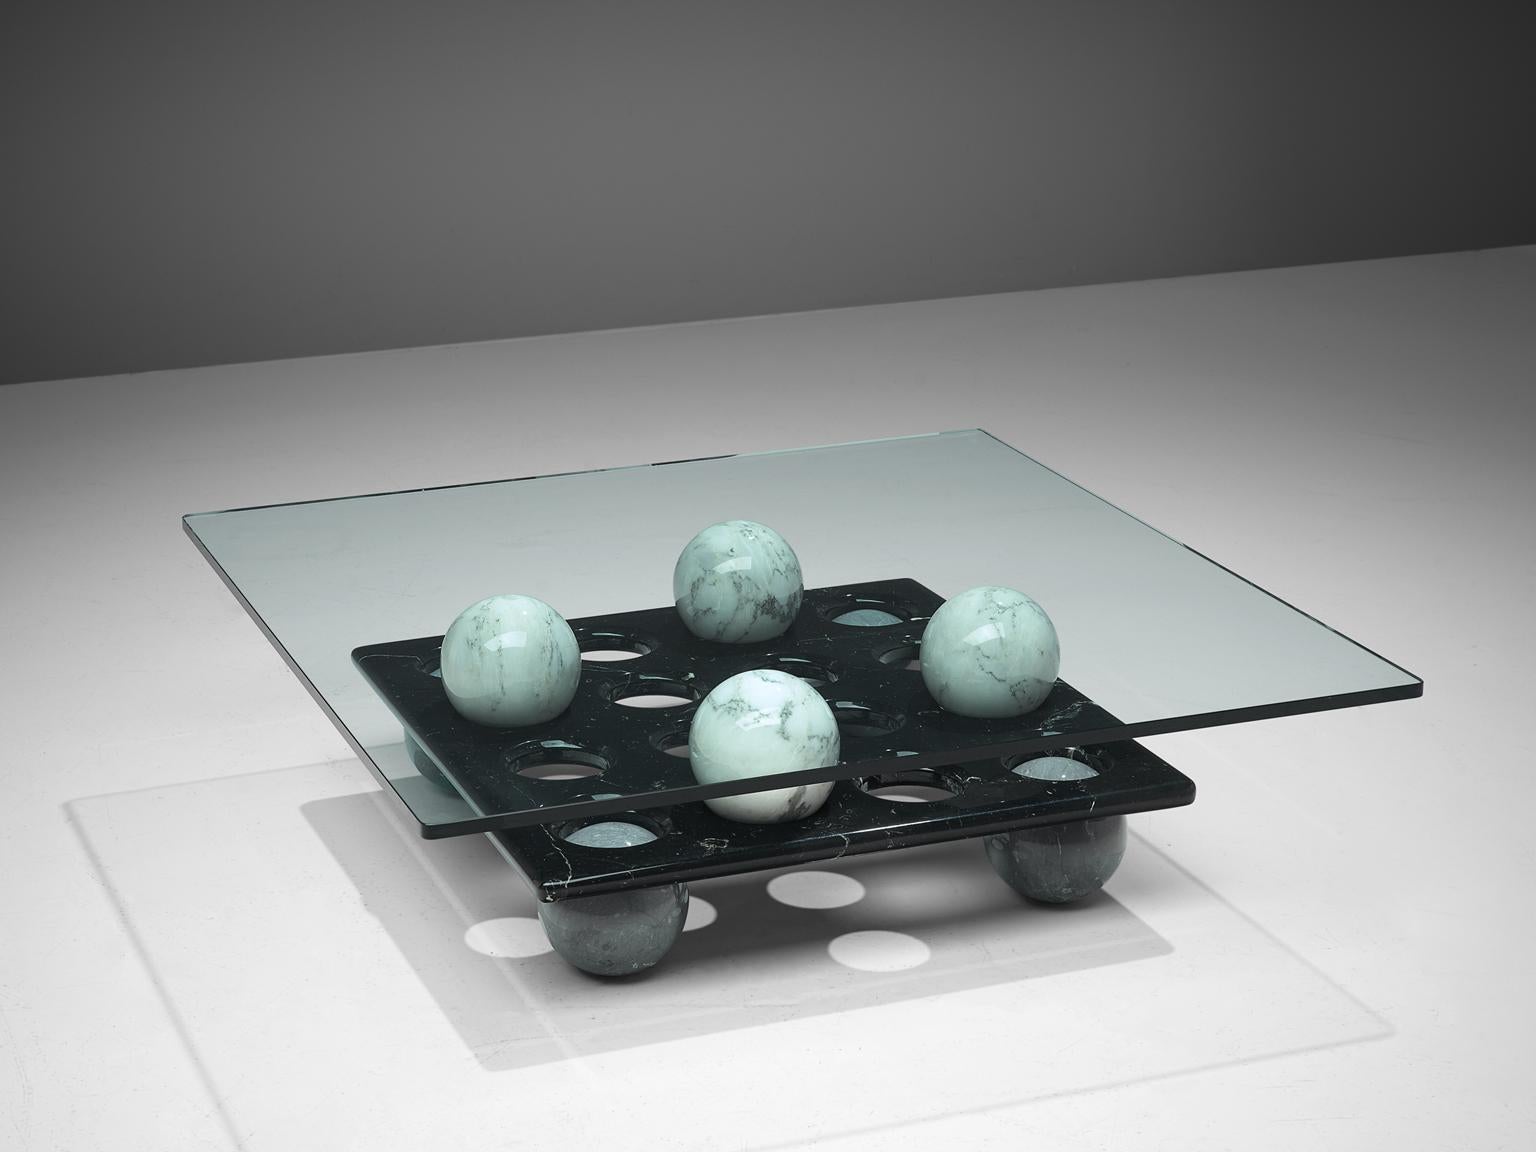 Cocktail table, glass and marble, Italy, 1970s.

This coffee table consists of two layers, divided by marble spheres. The op is made of glass, while the second layer is made of black marble. The black marble rectangular has 16 holes to hold the